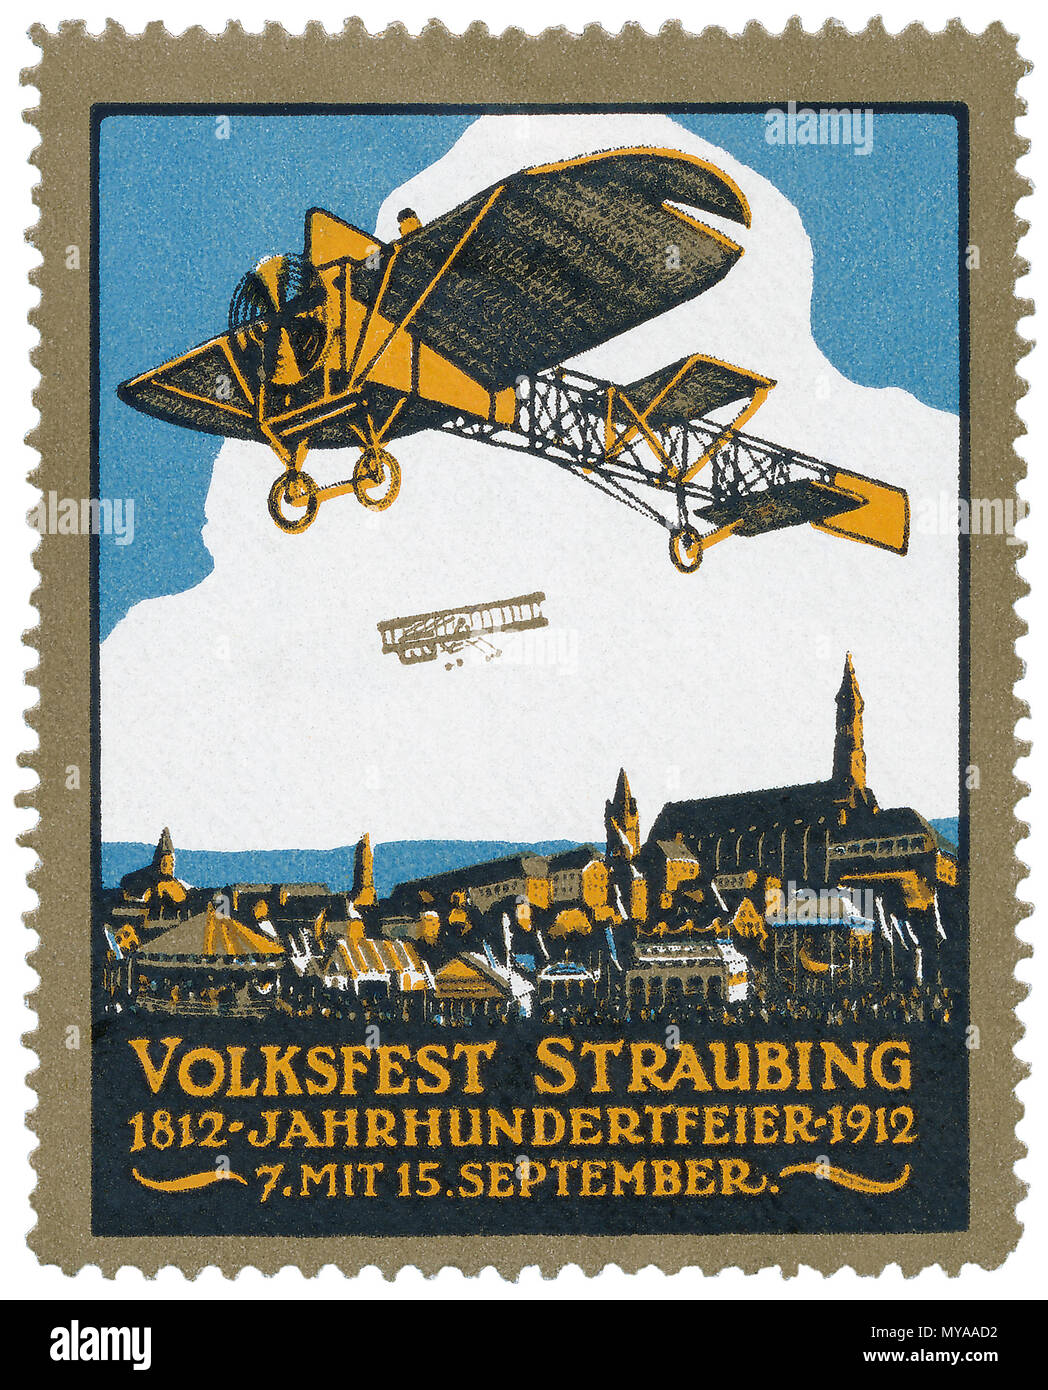 Vintage German trade stamp for the 1912 Straubing Volksfest. Straubing is in Lower Bavaria, the volksfest is now called Gäubodenvolksfest, and it is a beer festival and funfair that continues to this day. Stock Photo